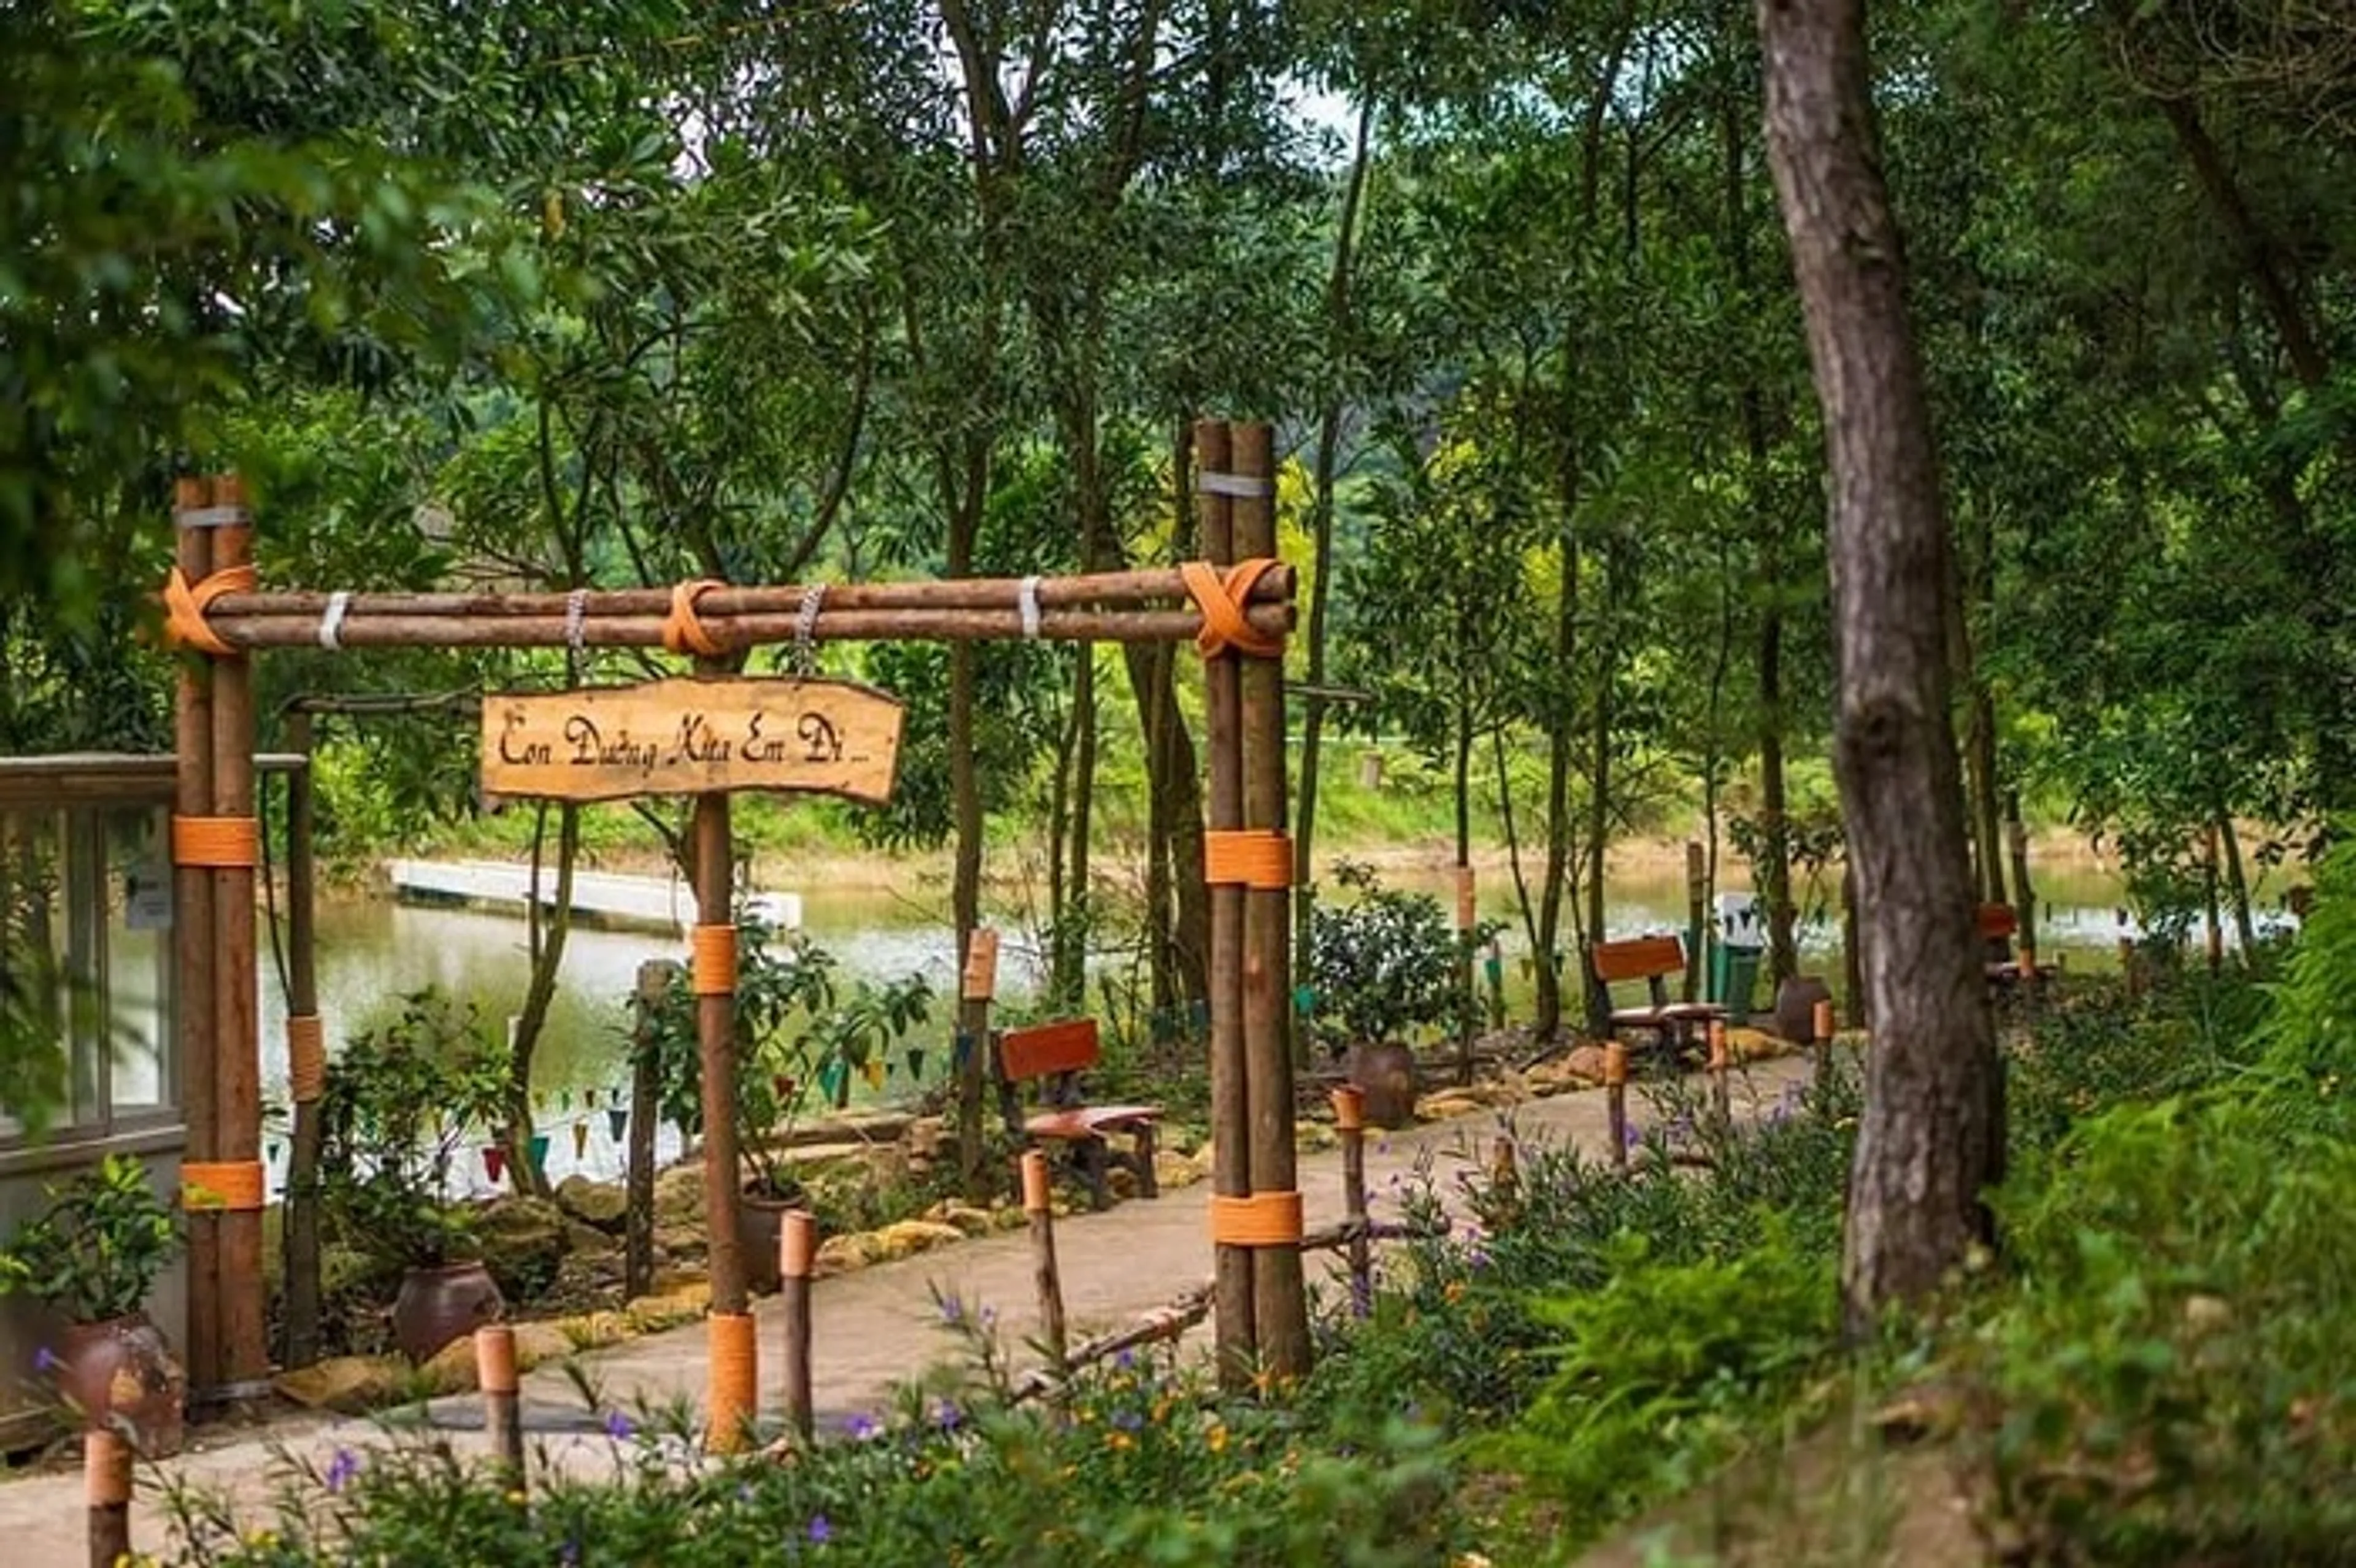 Thien Phu Lam eco-tourism area - A resort paradise not to be missed